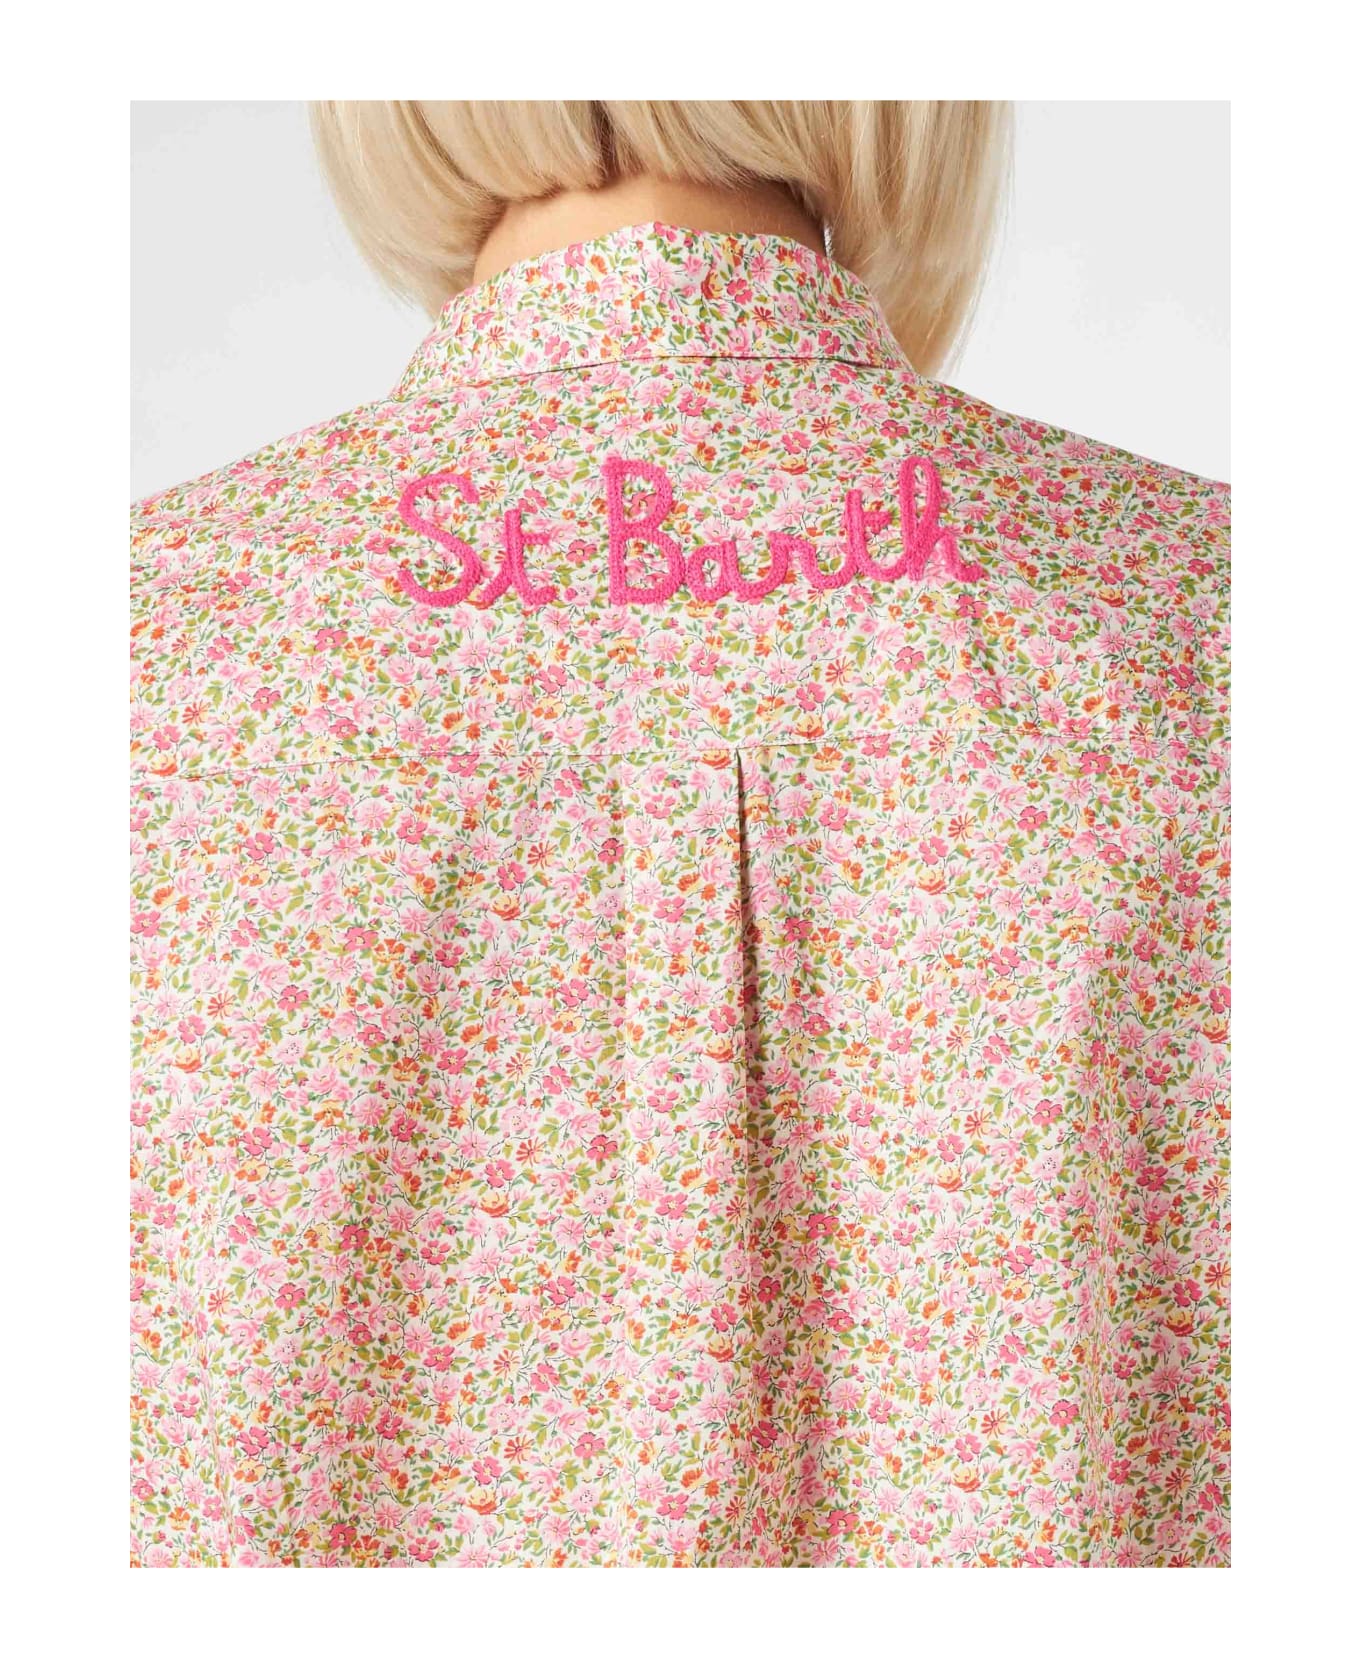 MC2 Saint Barth Woman Brigitte Cotton Shirt With Flower Print | Made With Liberty Fabric - MULTICOLOR